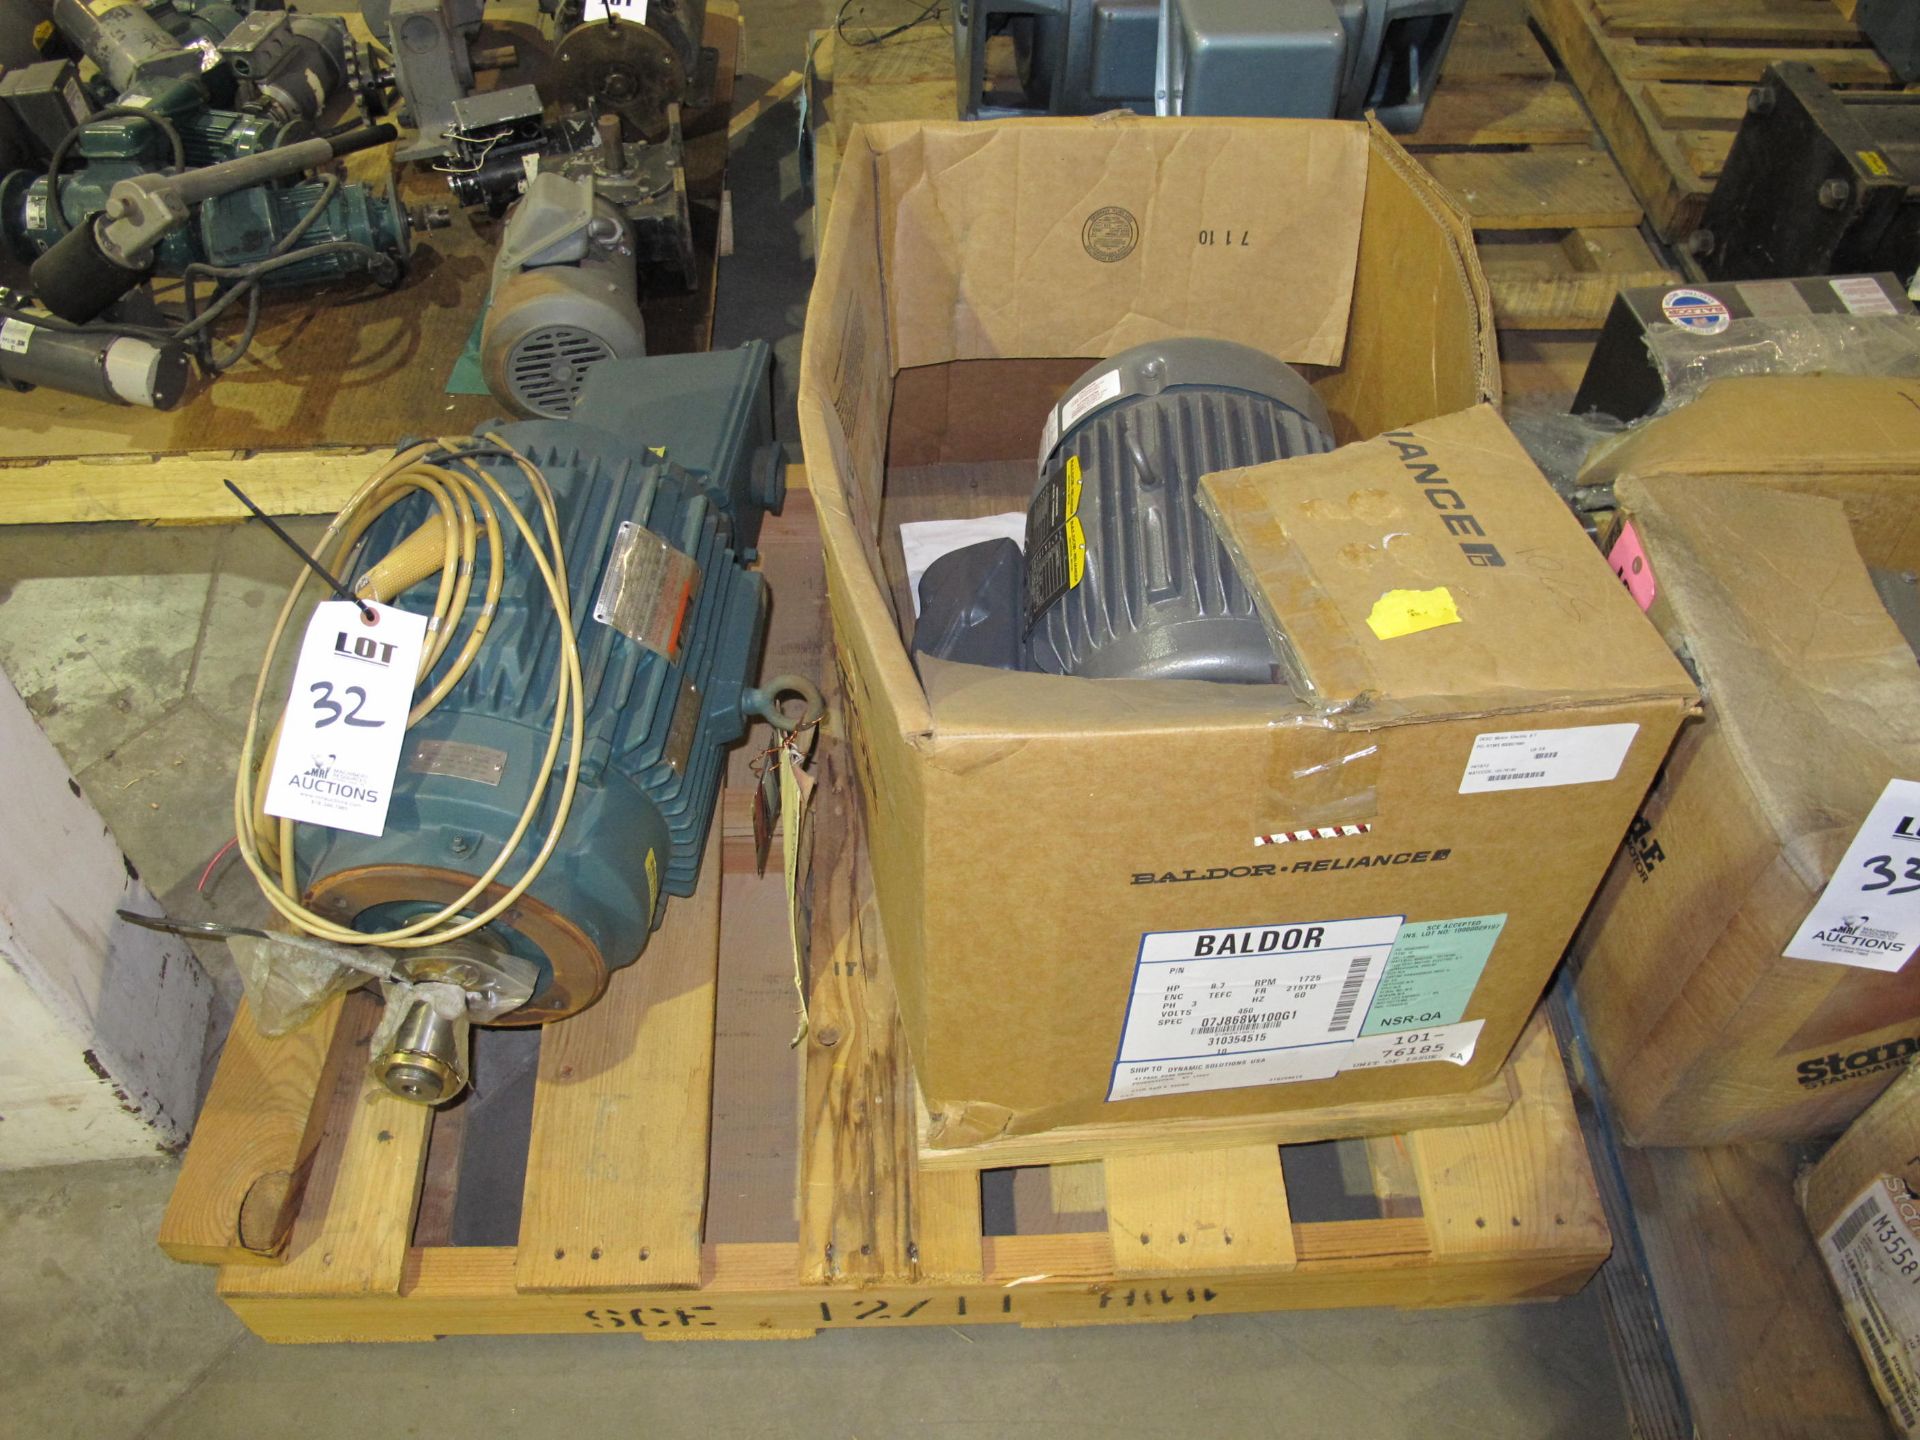 LOT TO INCLUDE: (1) RELIANCE ELECTRIC MOTOR, HP 13, 460 V, 18 A, 60 HZ, (1) BALDOR RELIANCE